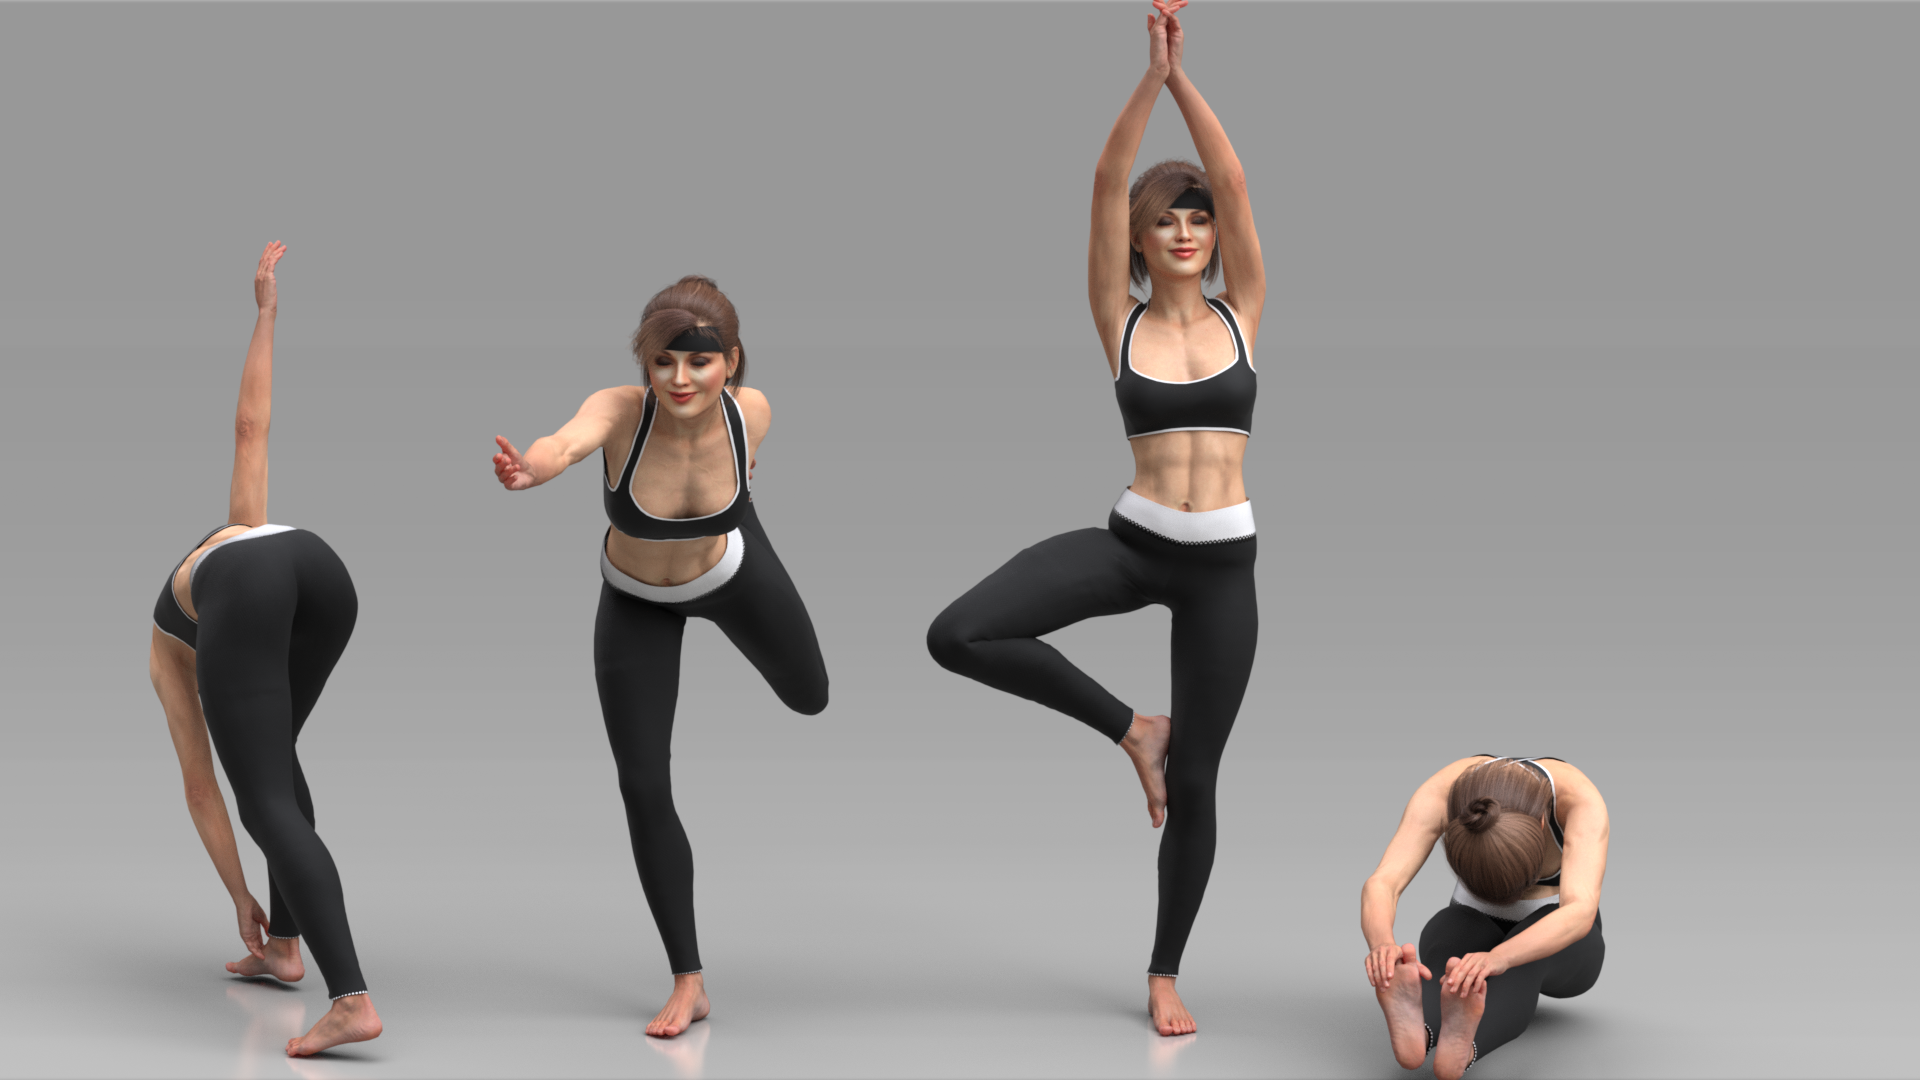 Yoga With My Mini” poses by 1SinfulKiss on Instagram | Sims 4 toddler, Sims  4 family, Sims 4